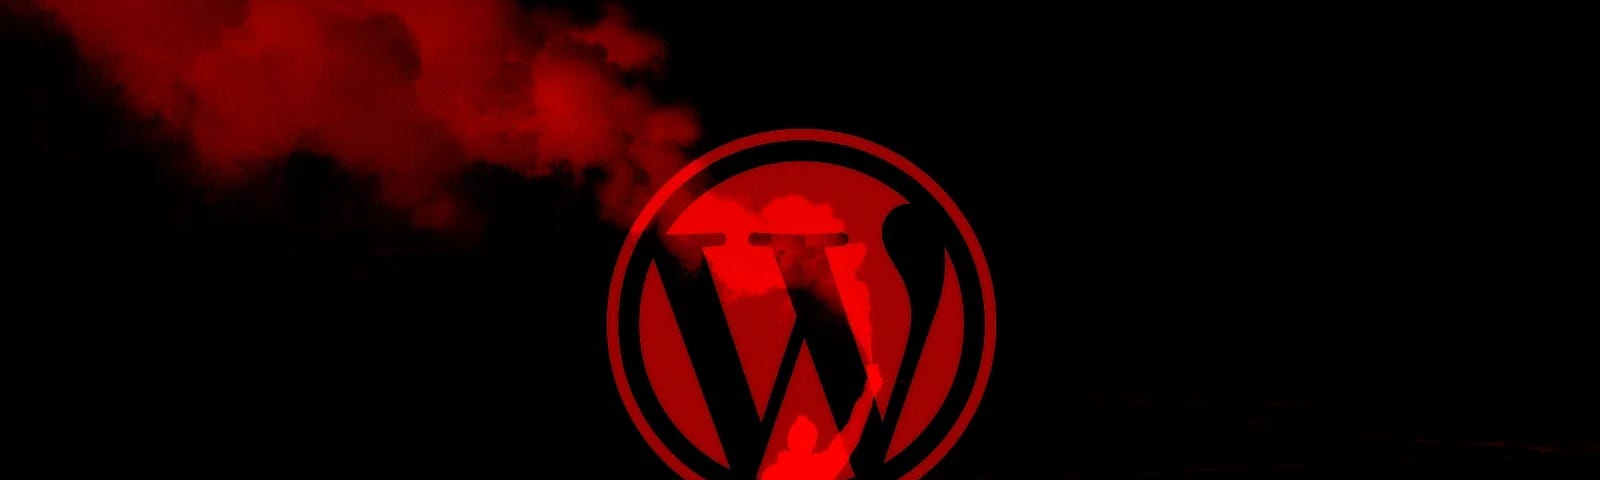 https://www.bleepingcomputer.com/news/security/poc-exploits-released-for-critical-bugs-in-popular-wordpress-plugins/